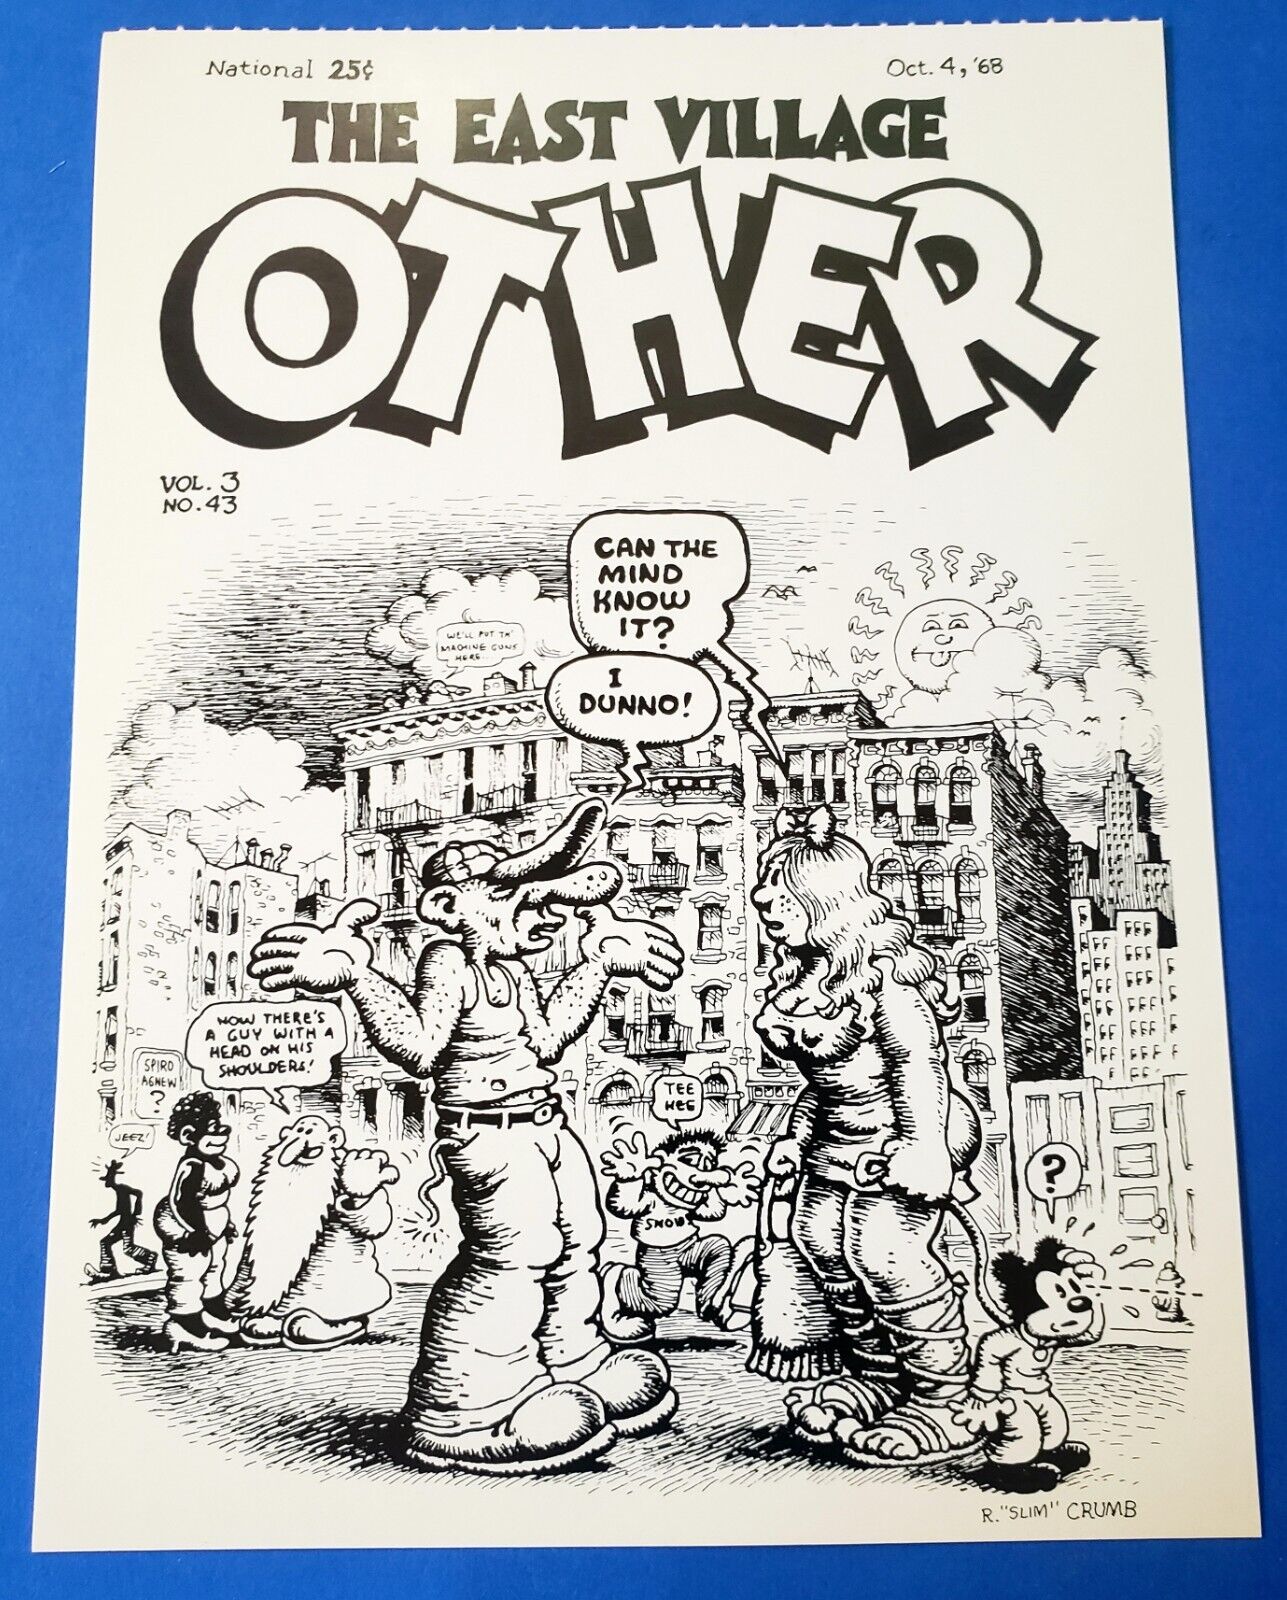 Postcard The East Village Other Oct 4 68\' Cover R Crumb 2006 Pomegranate